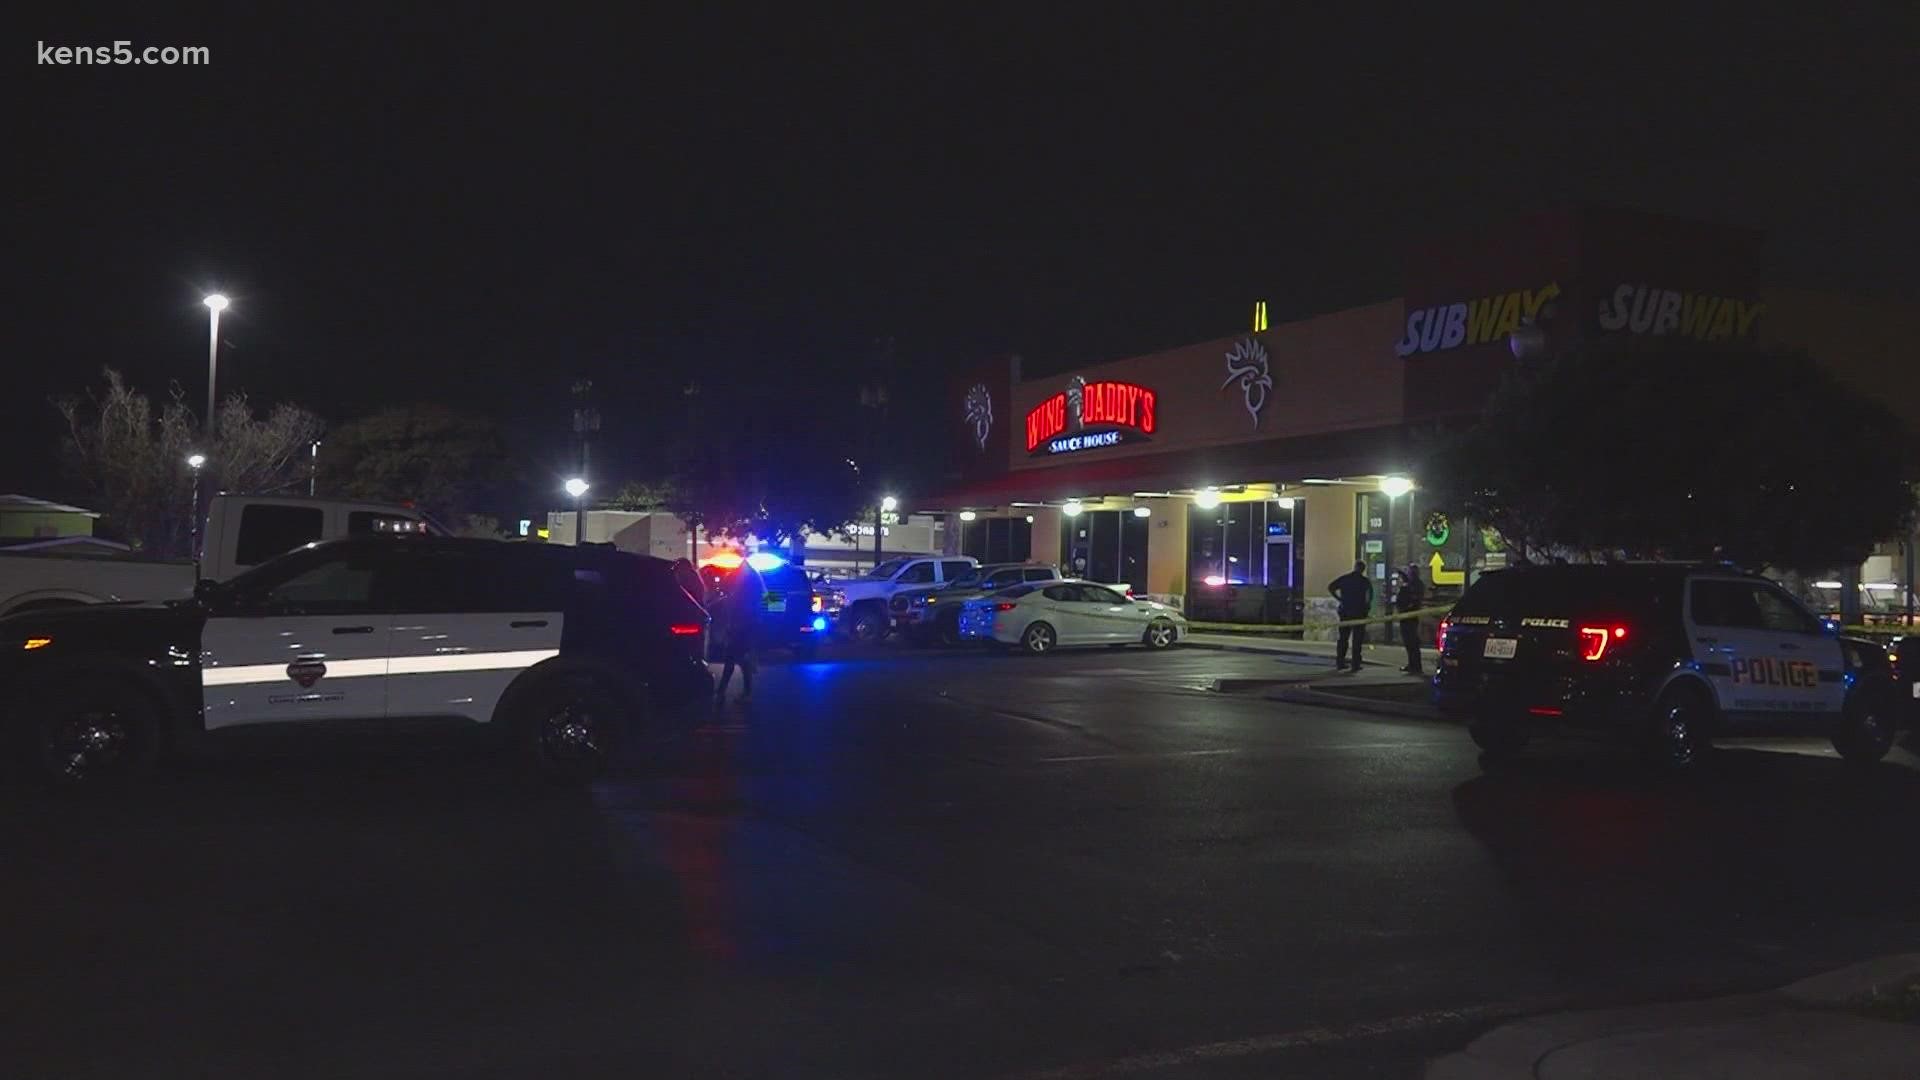 SAPD said an altercation happened inside the restaurant between two men. One of the men shot the other and then fled the scene.